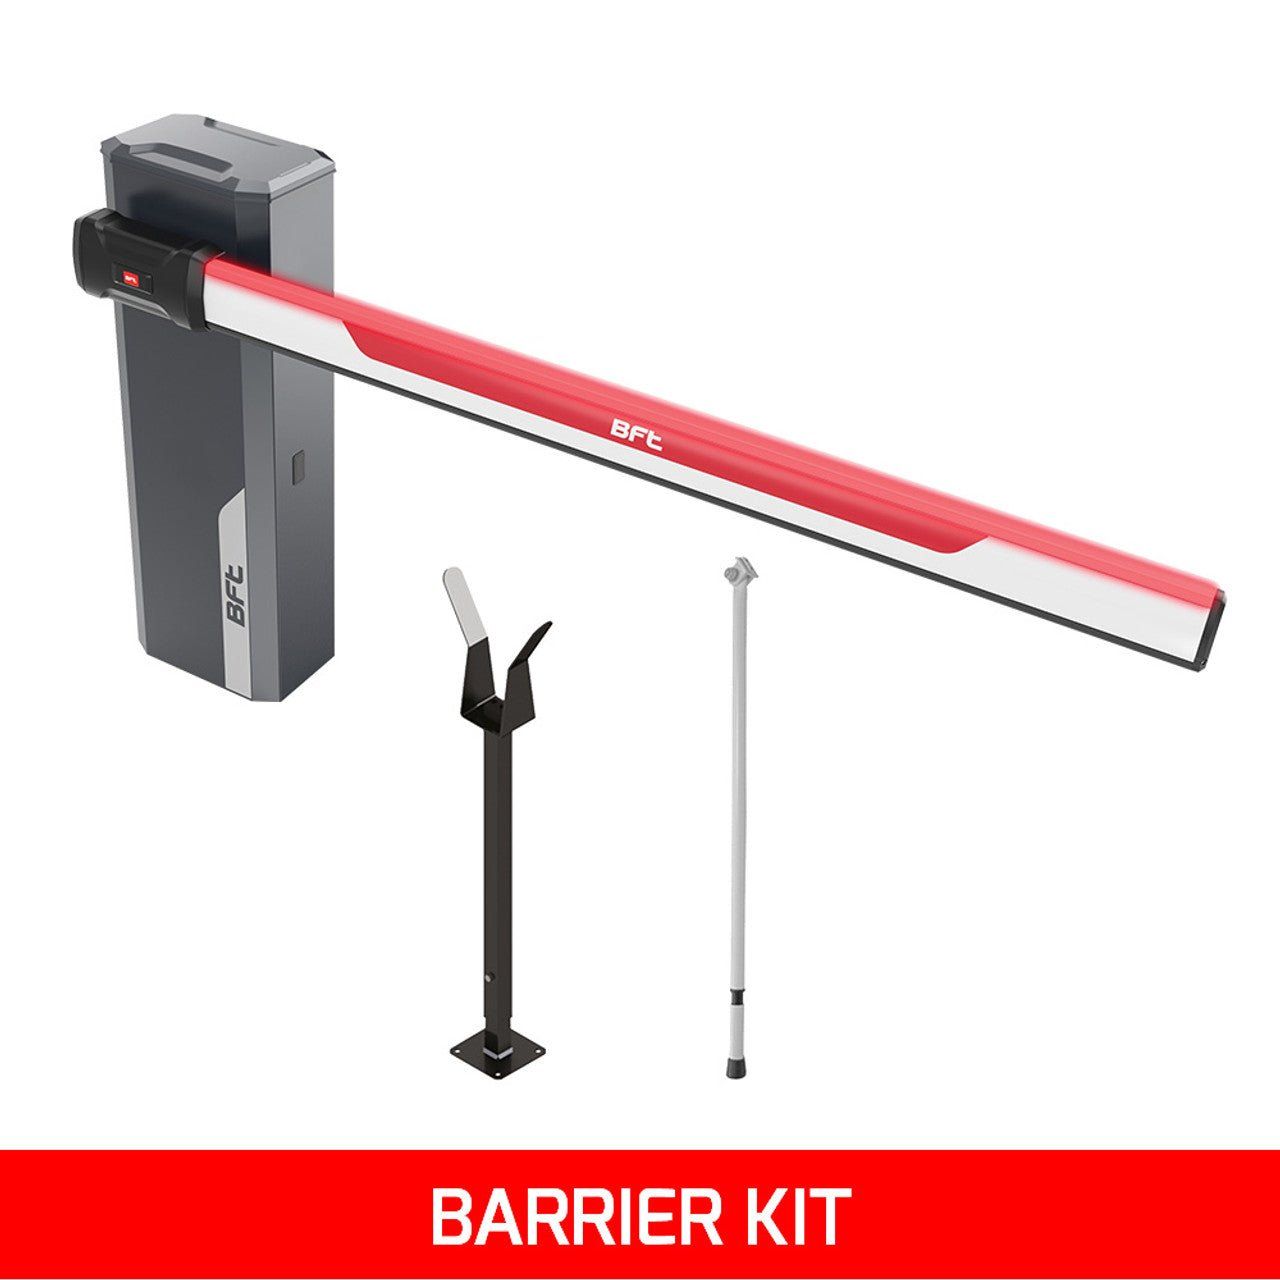 BFT GIOTTO BT ULTRA/ULTRA XL KIT Parking Barrier - Electric-Gate Kits